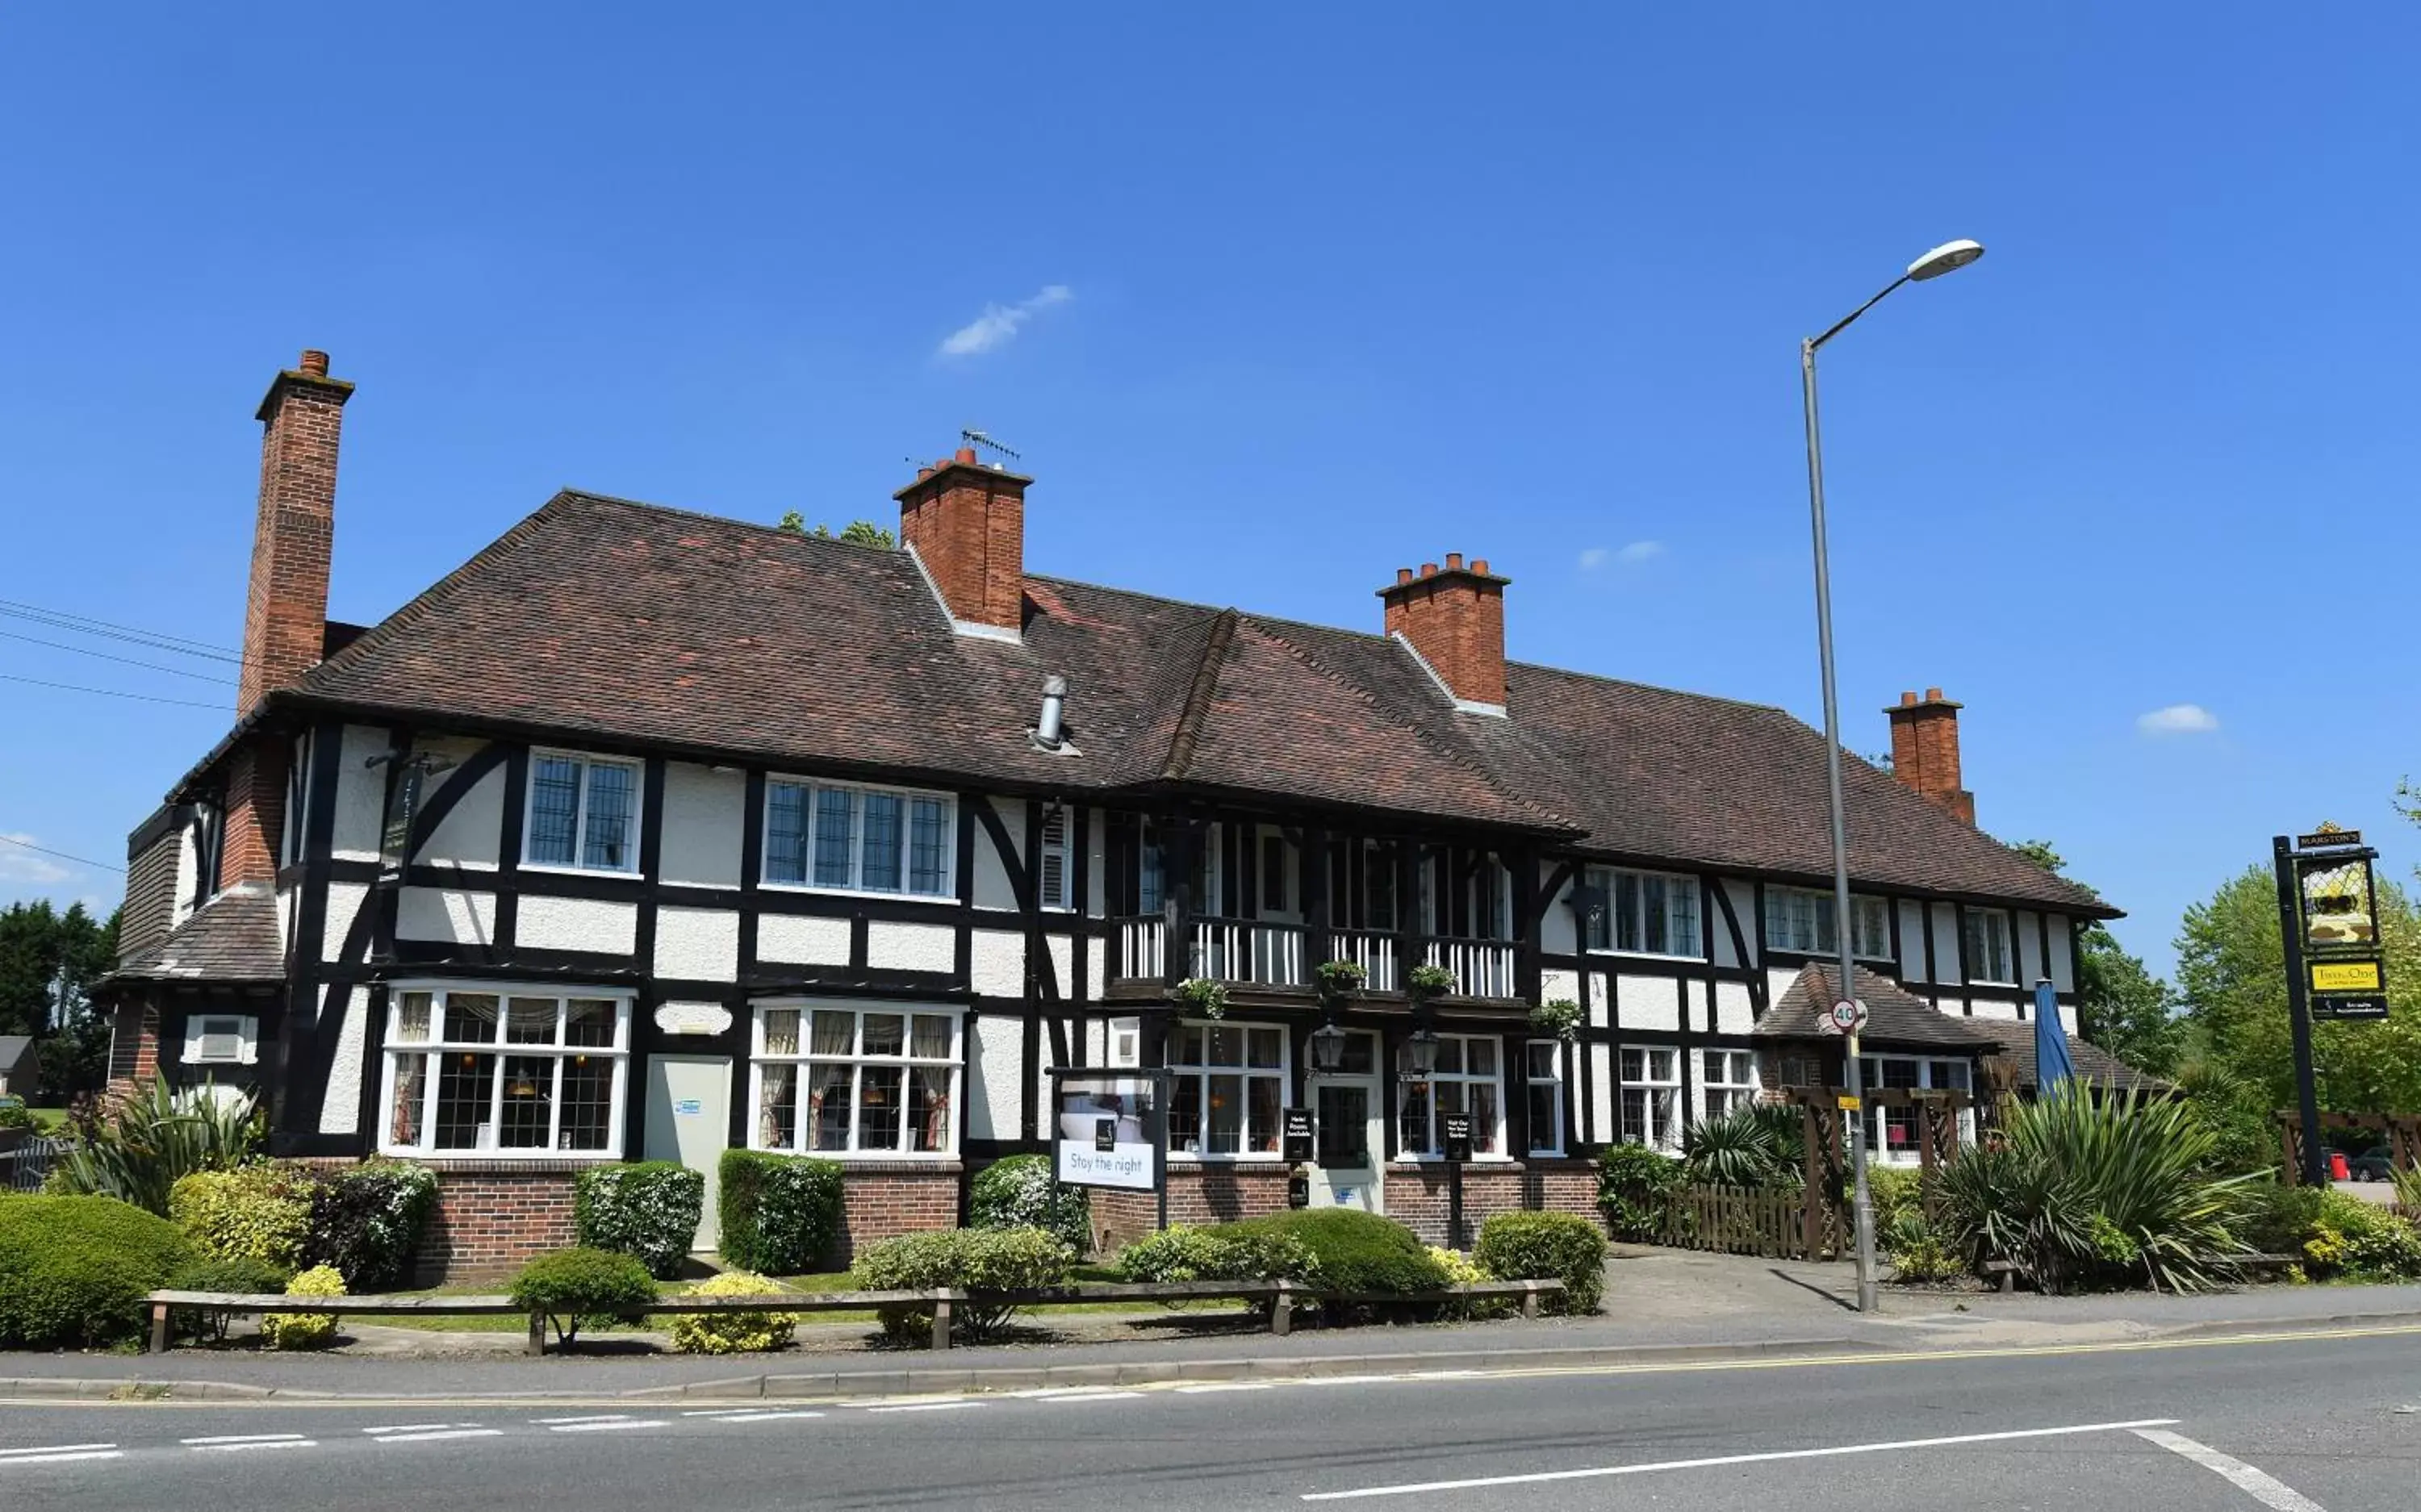 Facade/entrance, Property Building in Crown, Droitwich by Marston's Inns